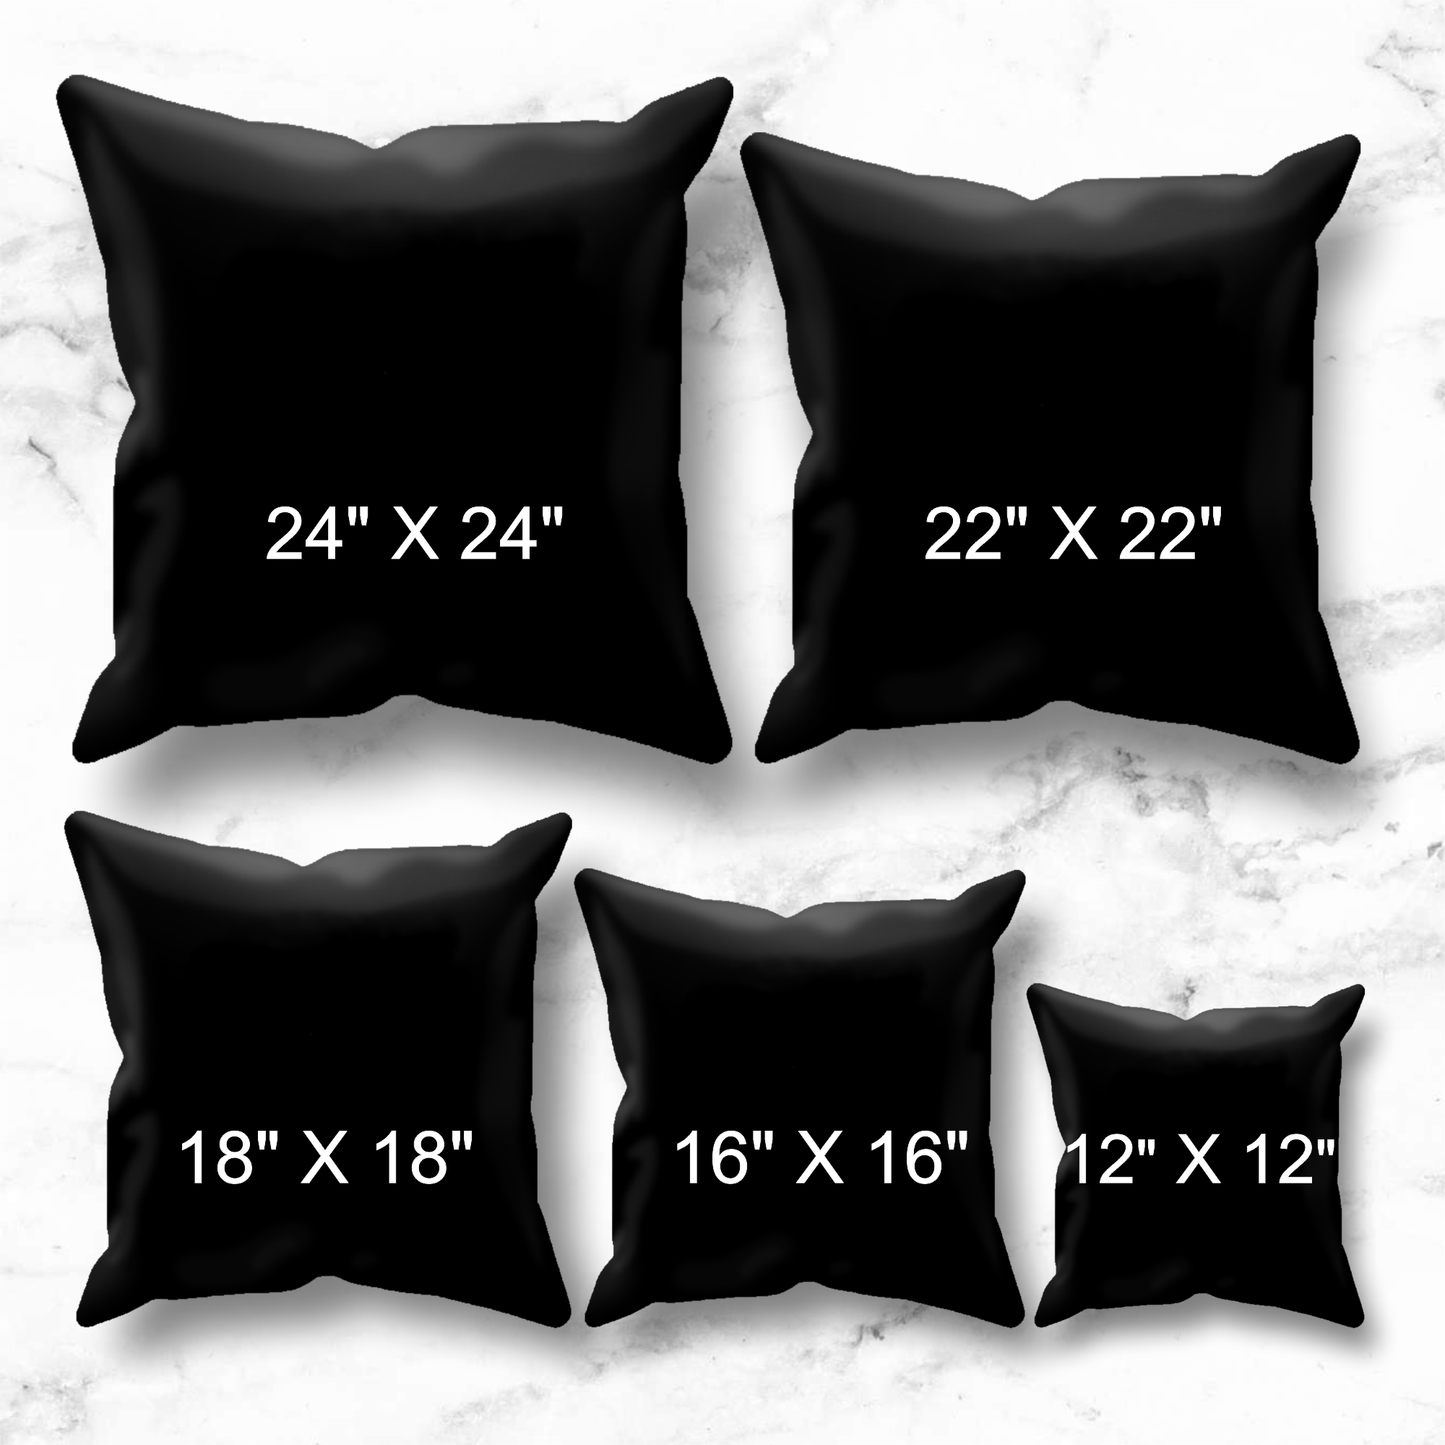 Black Cockapoo Cushion with Pillow Insert